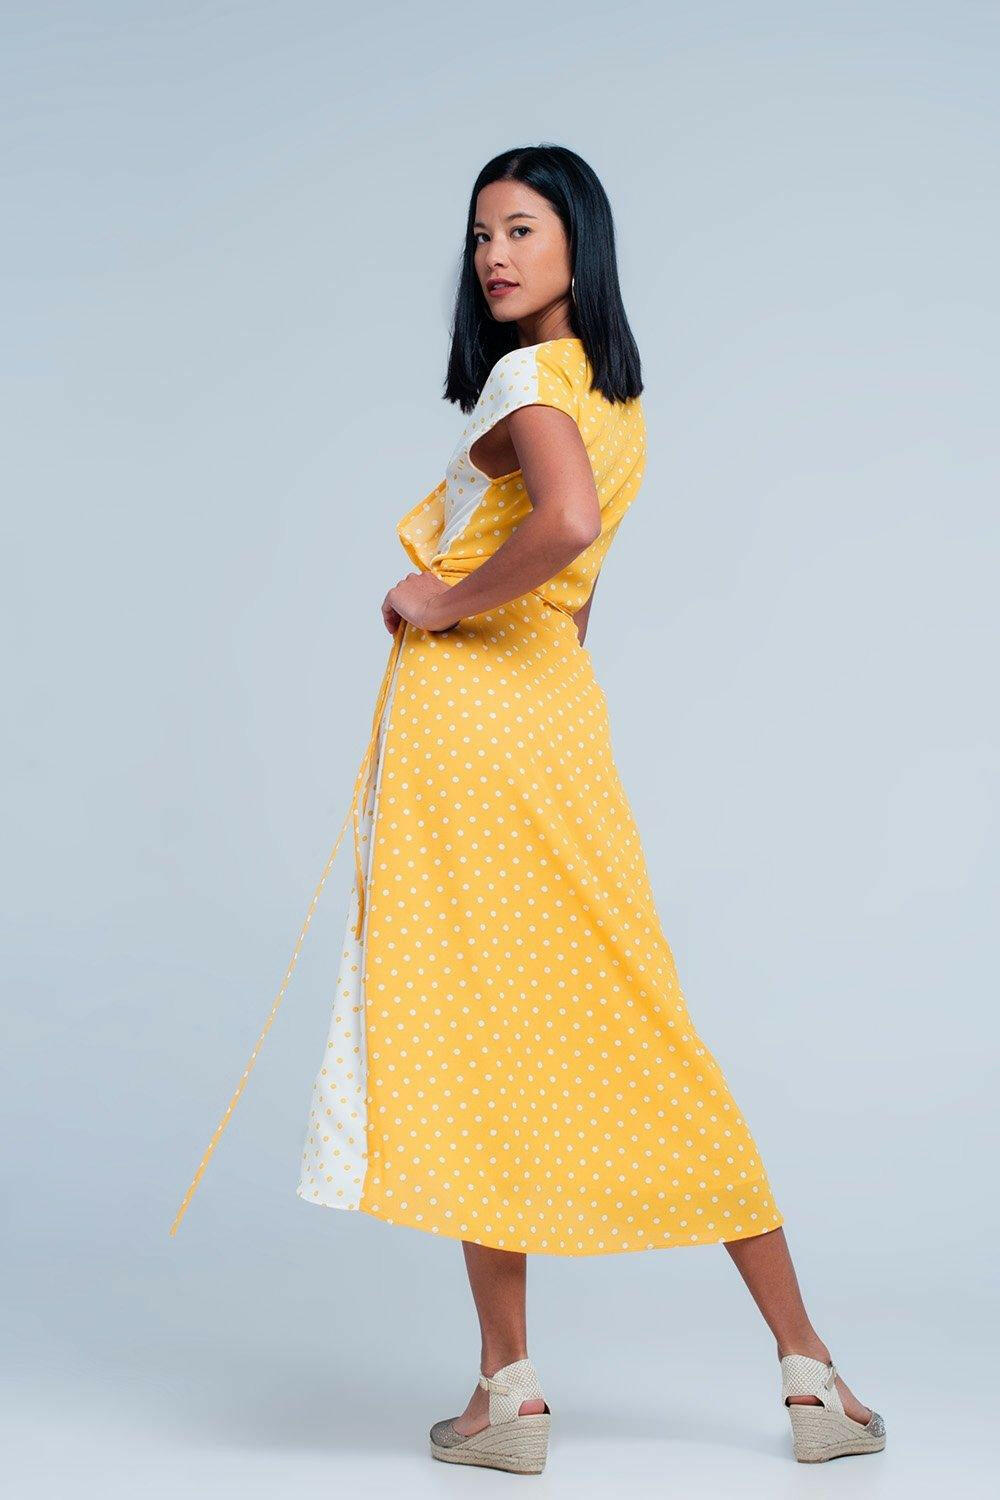 Yellow Dress With Polka Dots - GENUINE AUTHENTIC BRAND LLC